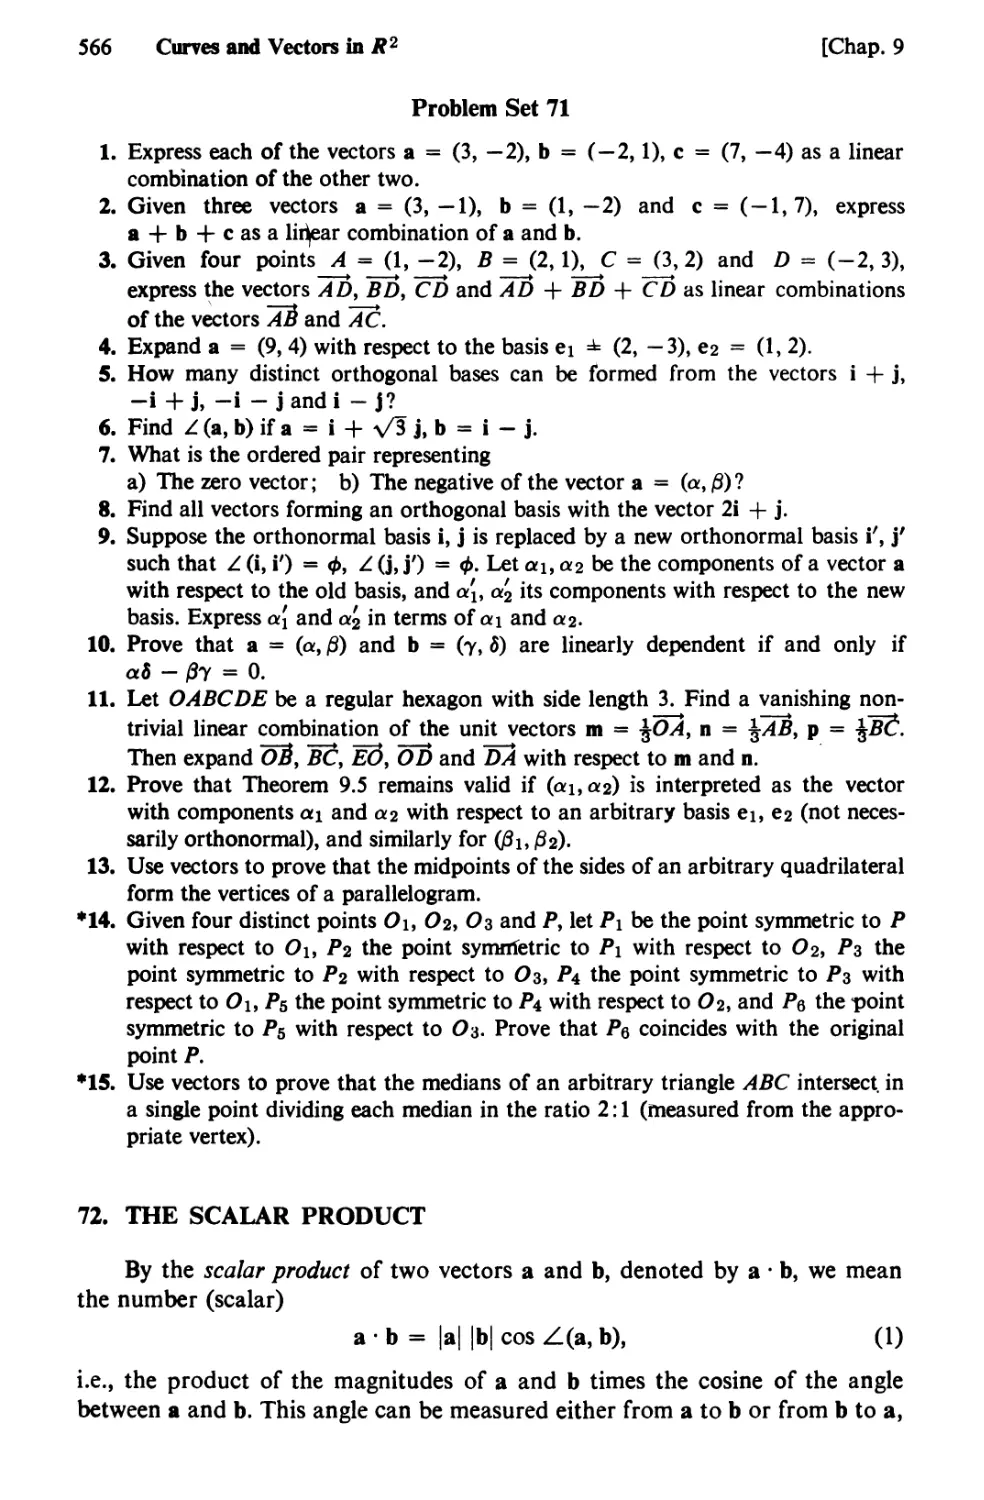 72. The Scalar Product